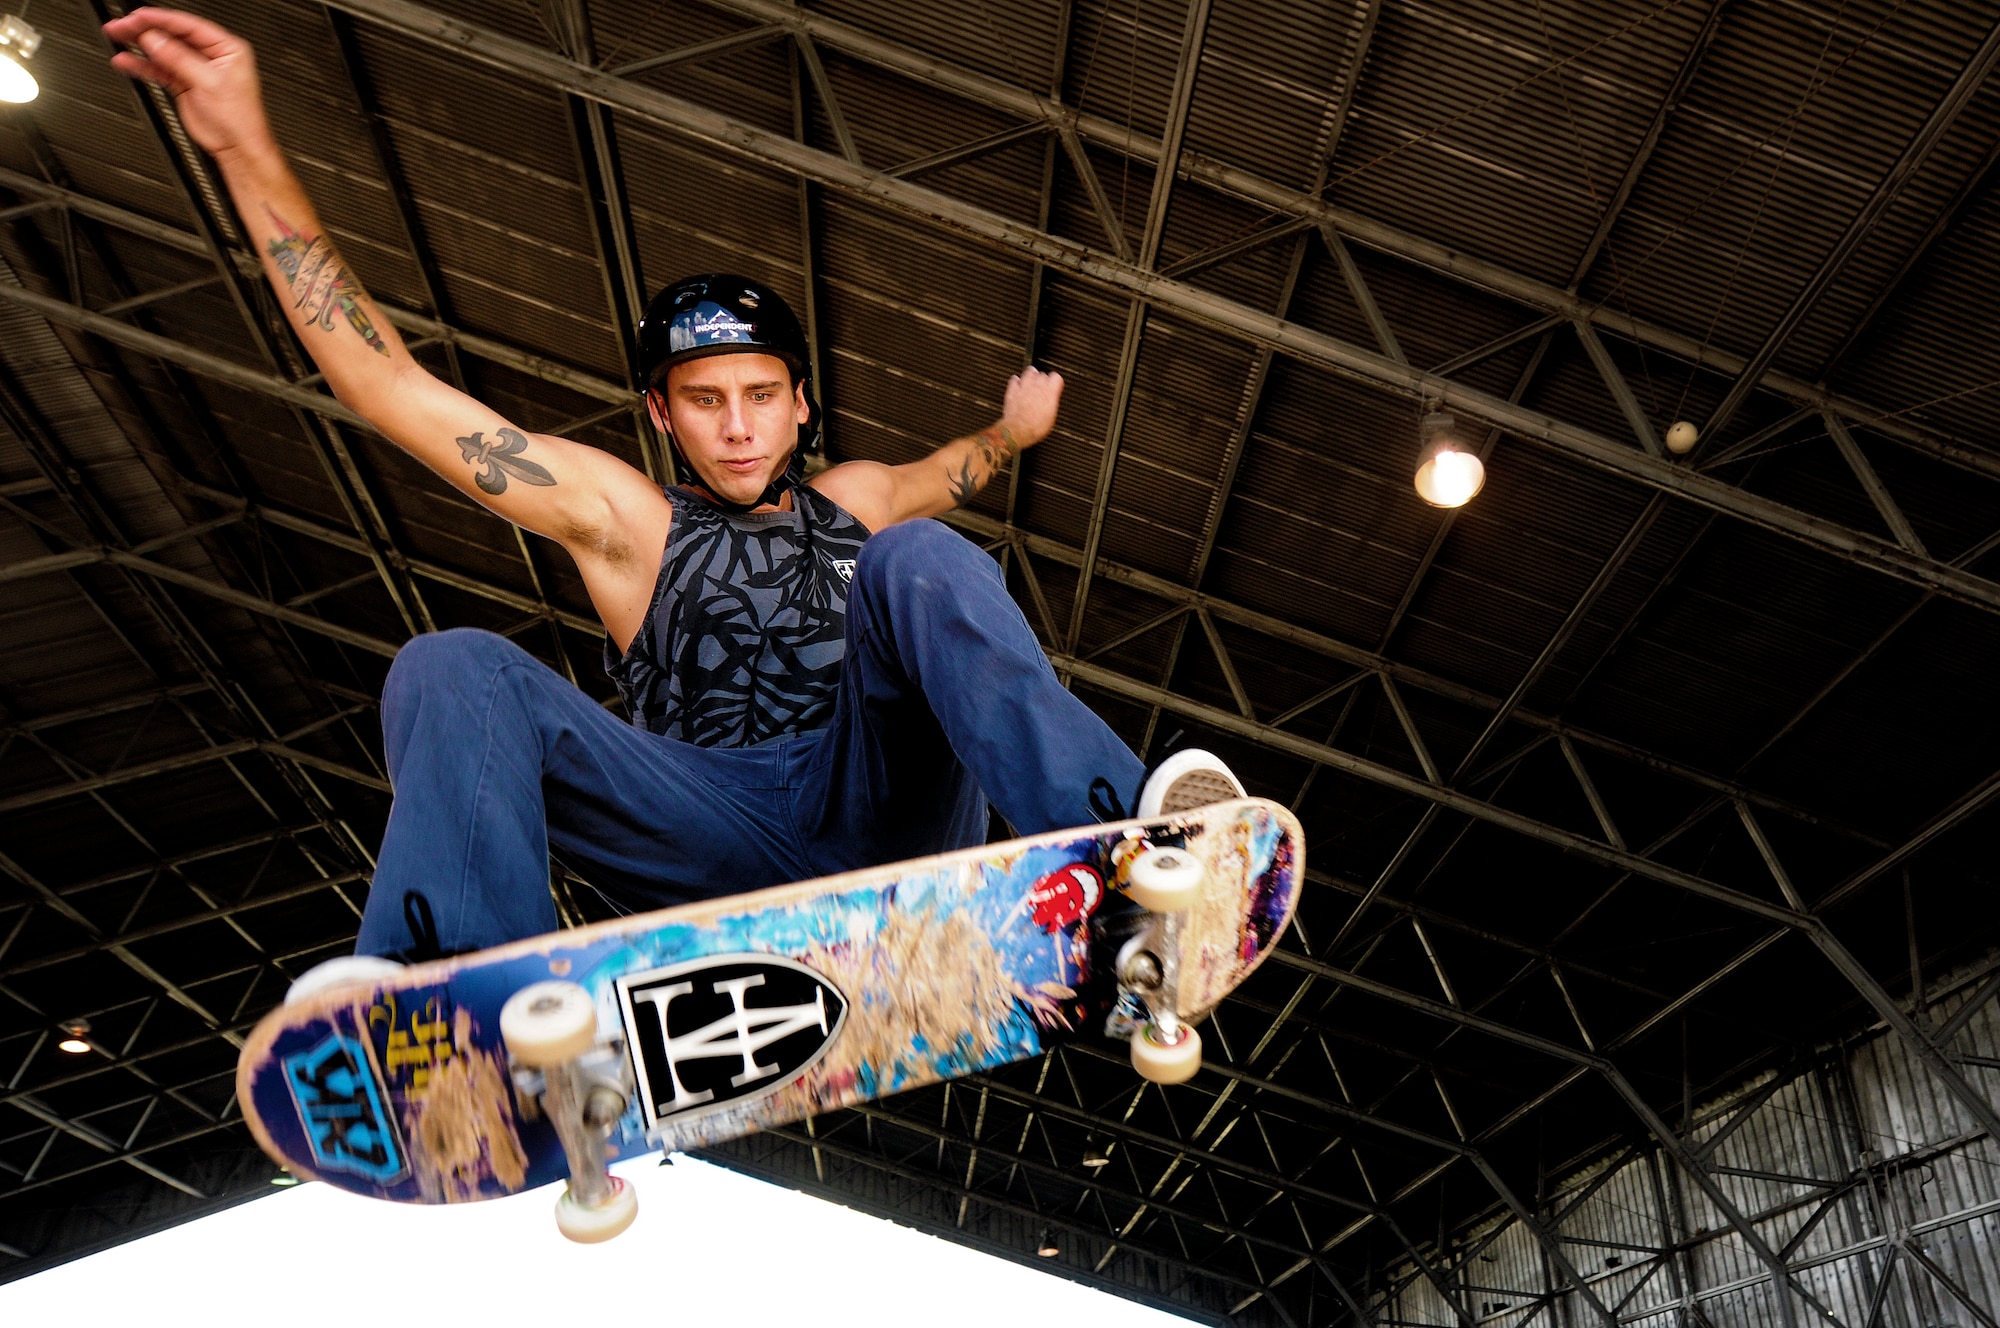 Chris Kays, son of the Hickam Skate Hangar’s proprietor Mike Kays, performs a trick at the Hickam Skate Hangar Aug. 21, Joint Base Pearl Harbor-Hickam, Hawaii. He is a professionally sponsored skateboarder who provides lessons for any level of skater at the hangar. The converted hangar is the only indoor wooden facility on all the Hawaiian Islands. It also boasts the only wooden keyhole bowls, or empty swimming pool shaped ramps, on Oahu. In addition, it has a 15,000 square foot street course, multiple mini ramps, 12-foot vertical ramp with a 14-foot tombstone connected to a saddle and three-quarter pipe. (U.S. Air Force photo/Staff Sgt. Mike Meares)